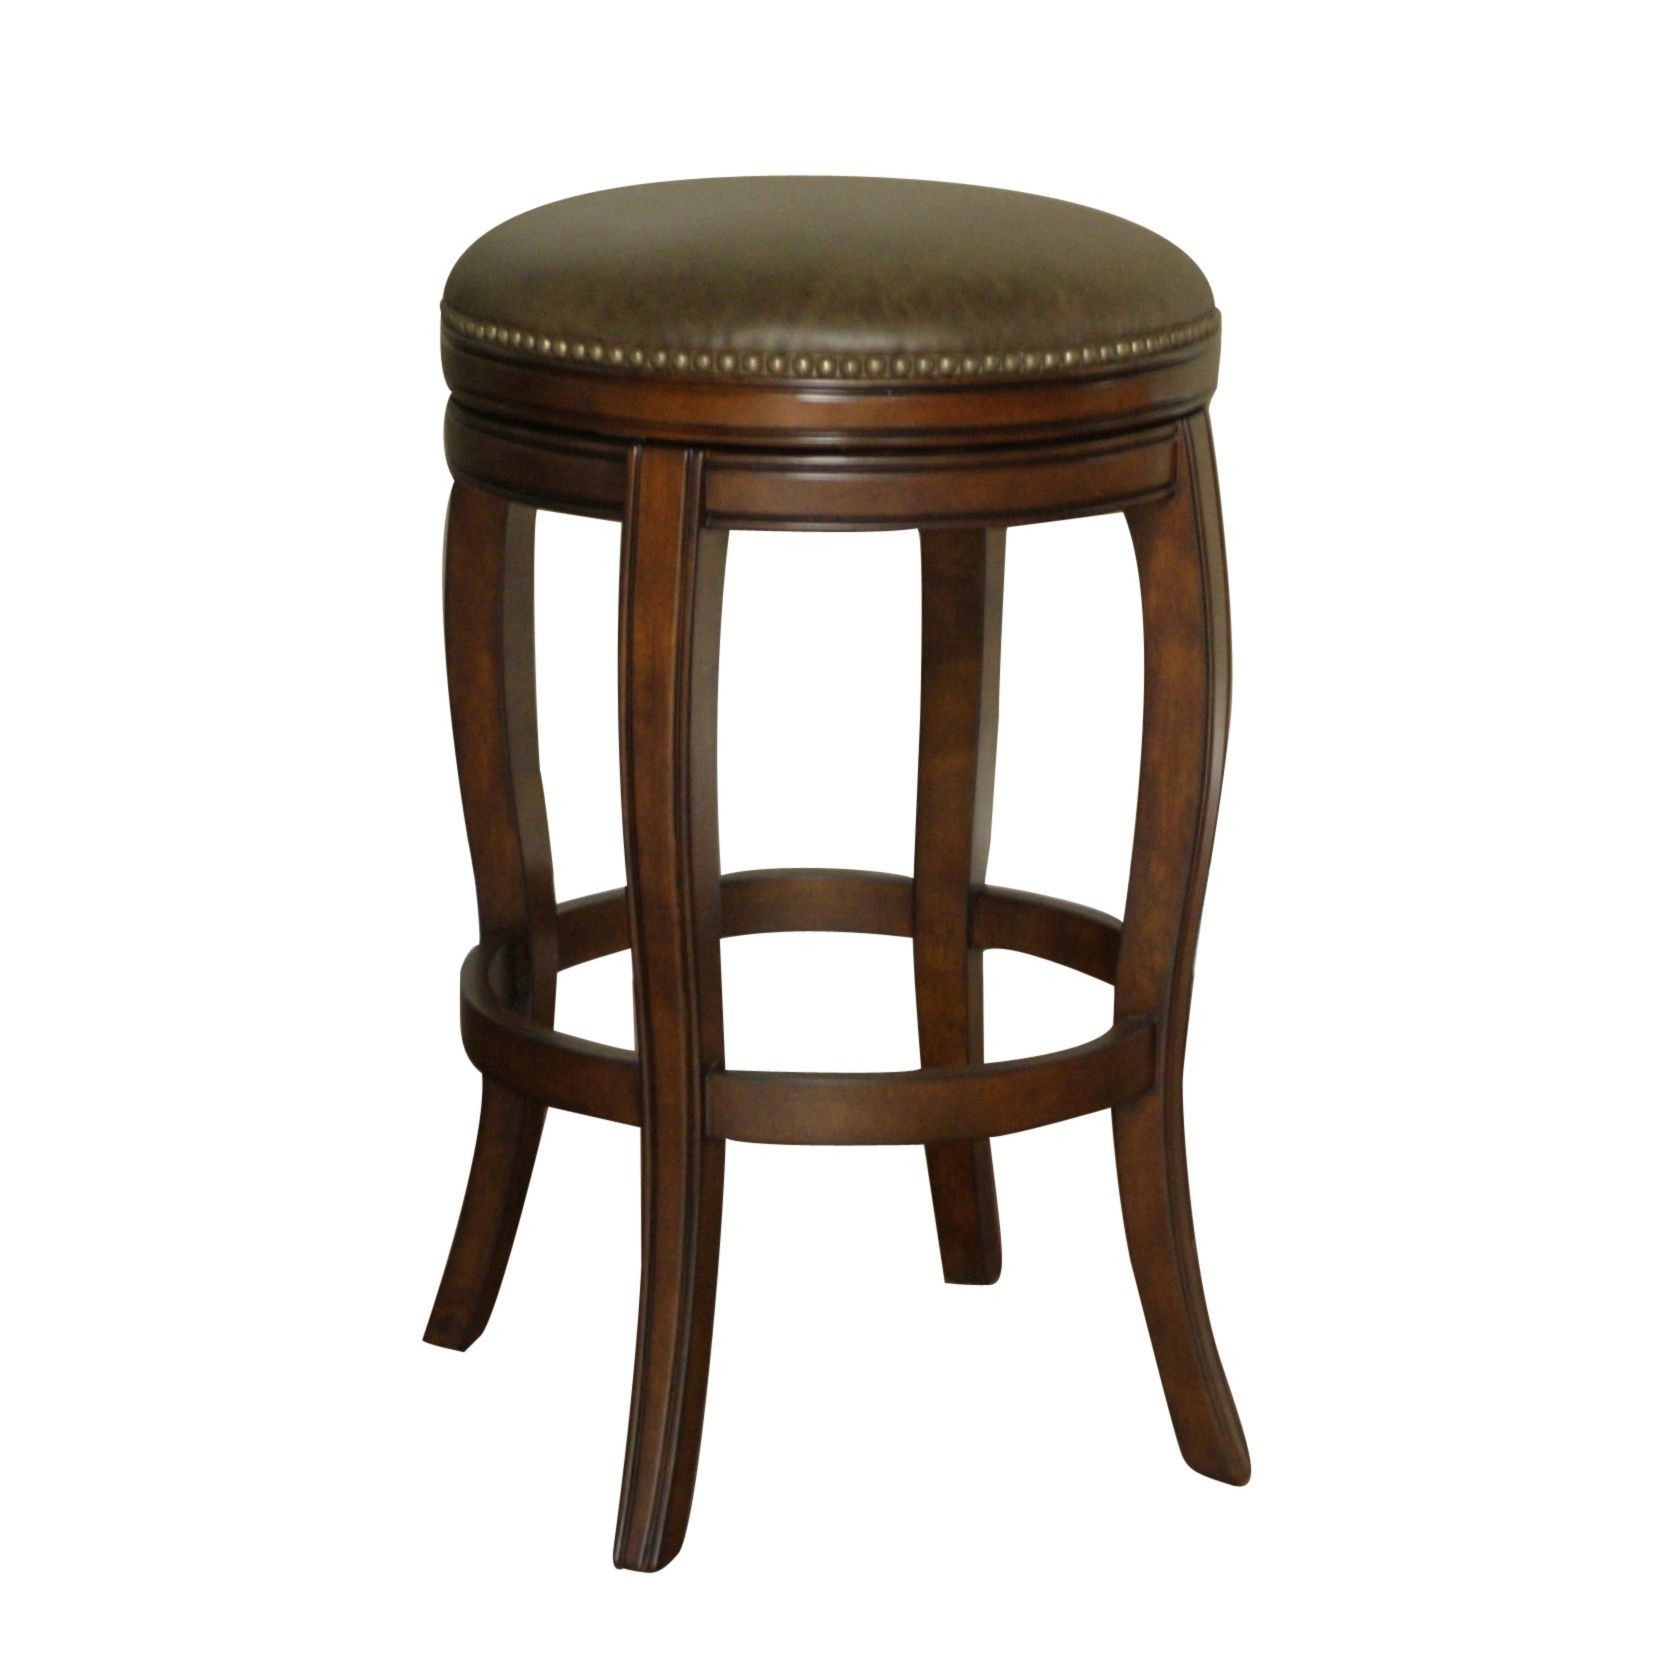 Wenden tall 34 inch brown leather swivel bar stool